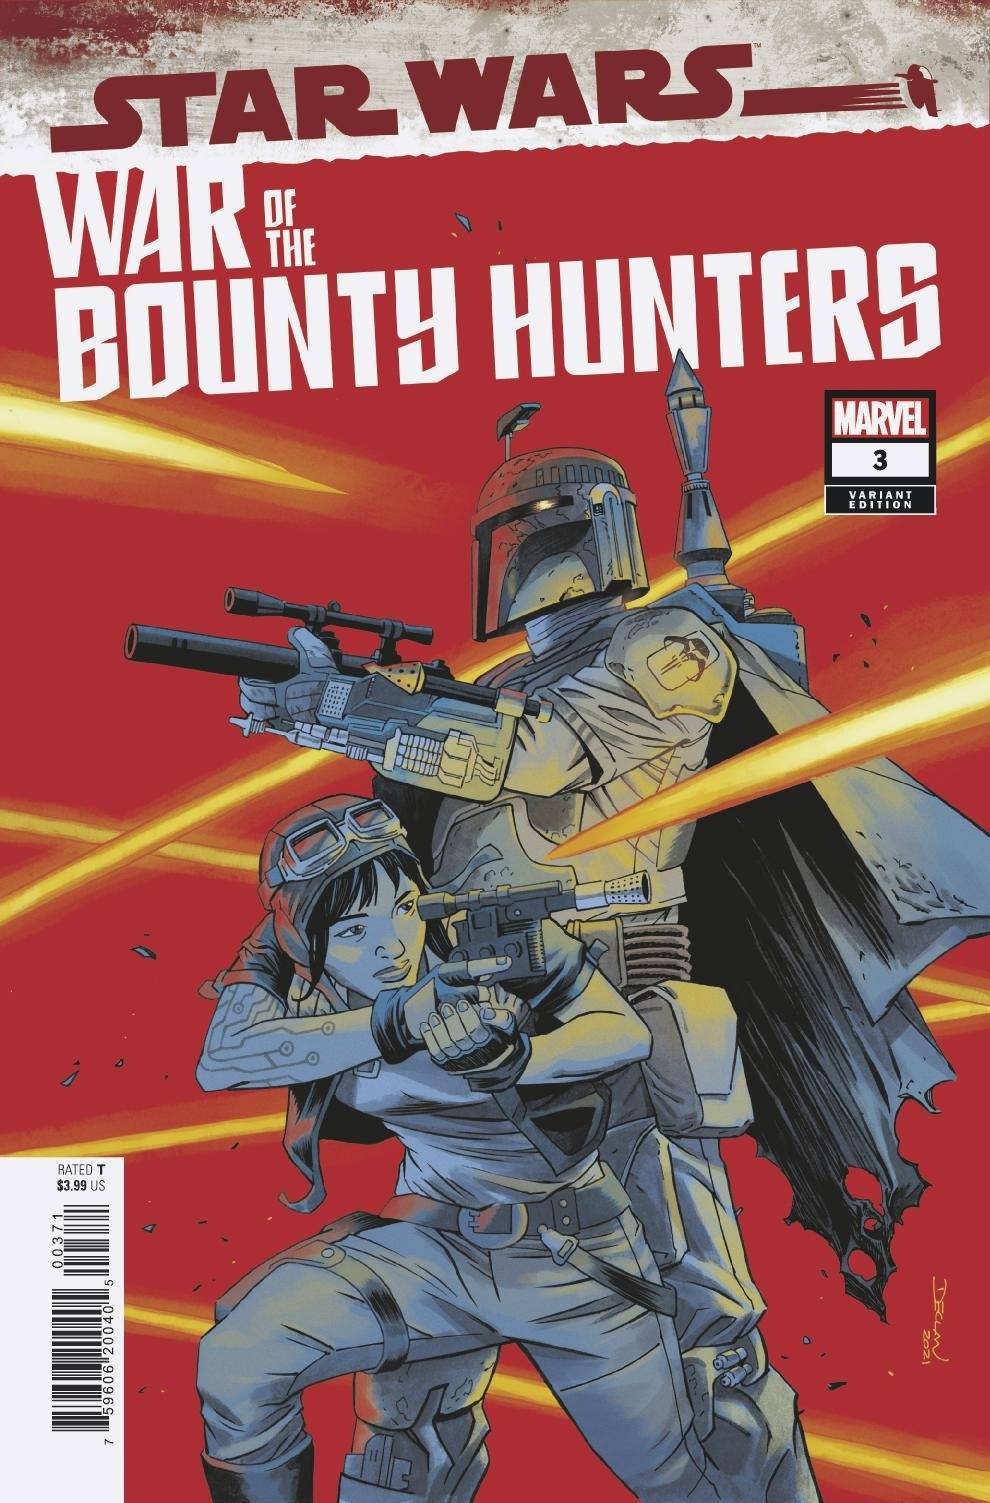 War of the Bounty Hunters #3 (Declan Shalvey Variant Cover) (11.08.2021)